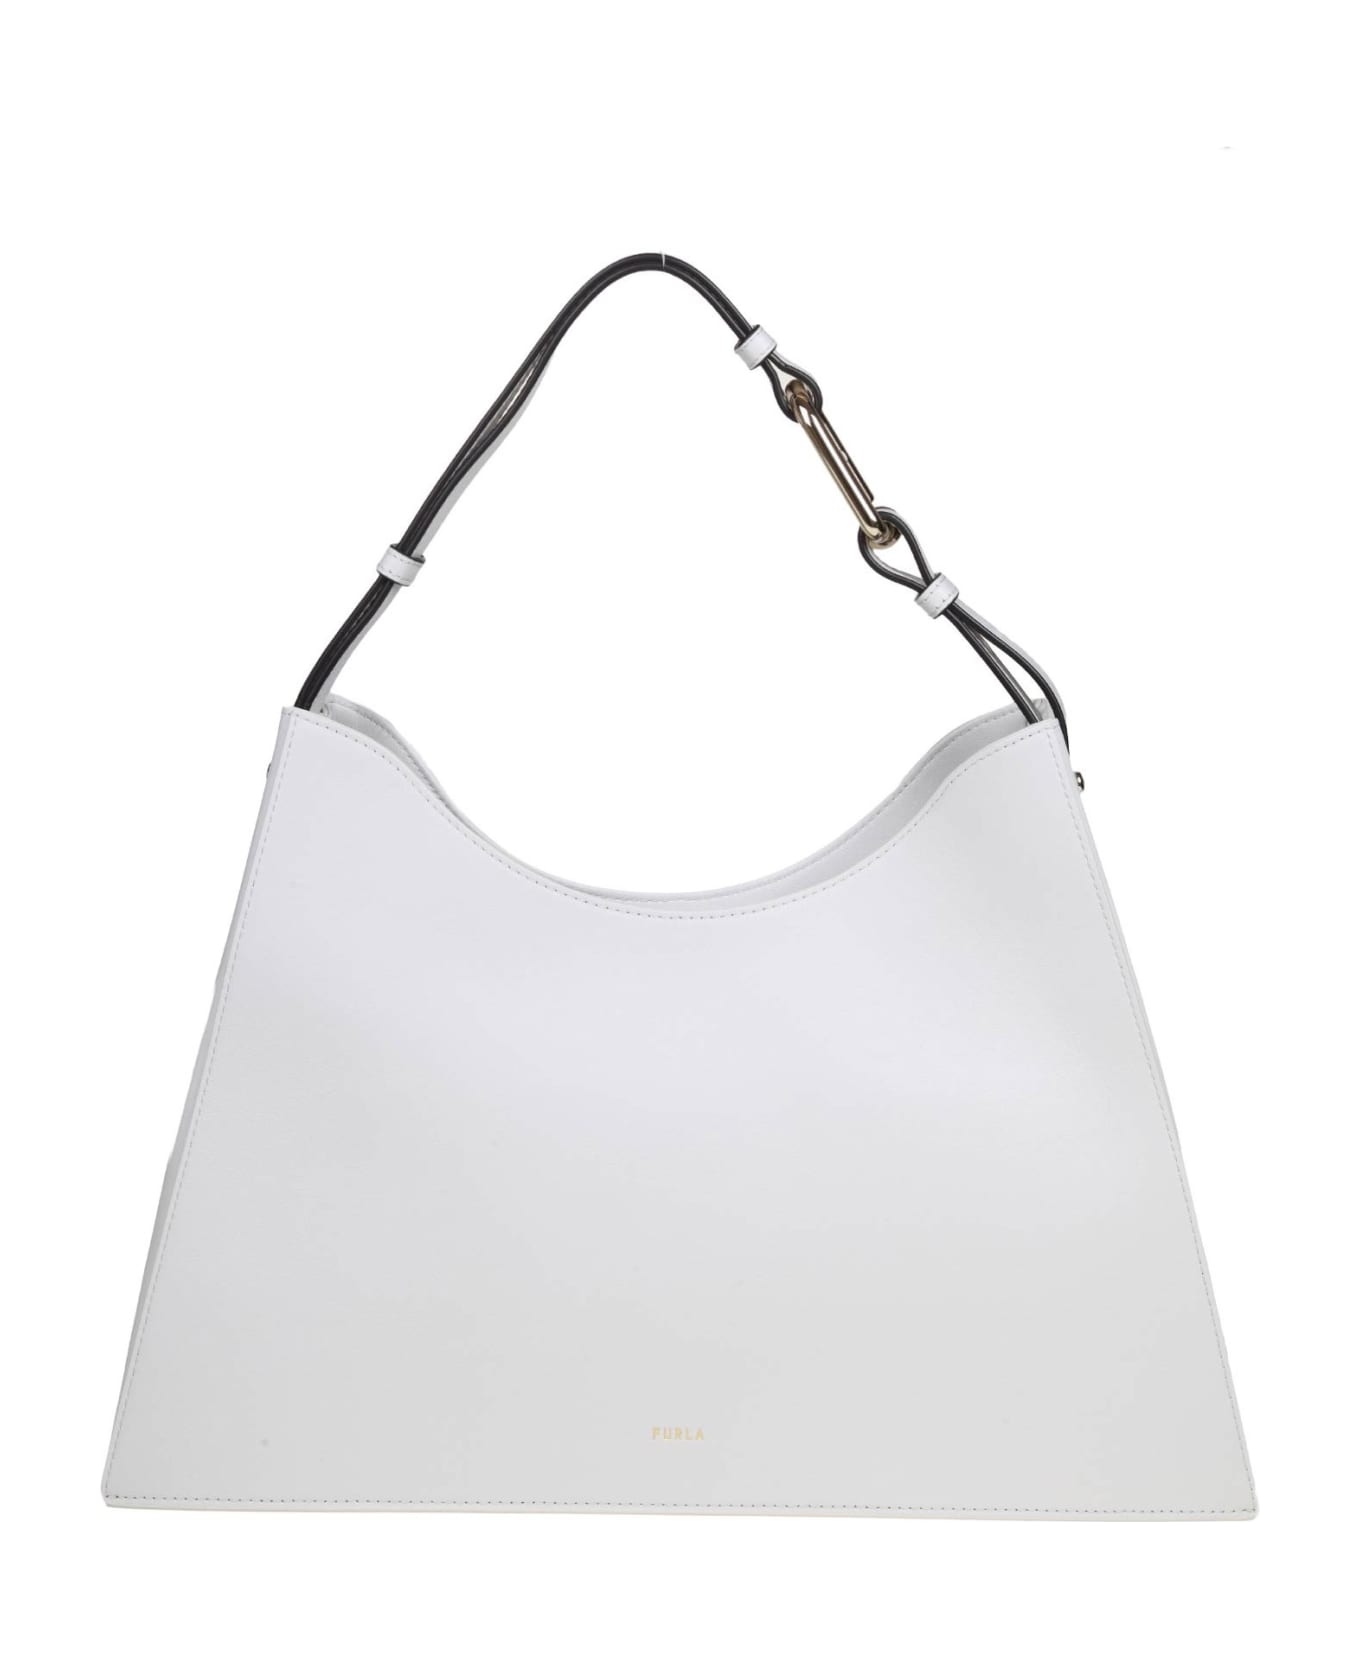 Furla Nuvola Shoulder Bag In Marshmallow Color Leather - Marshmallow ショルダーバッグ